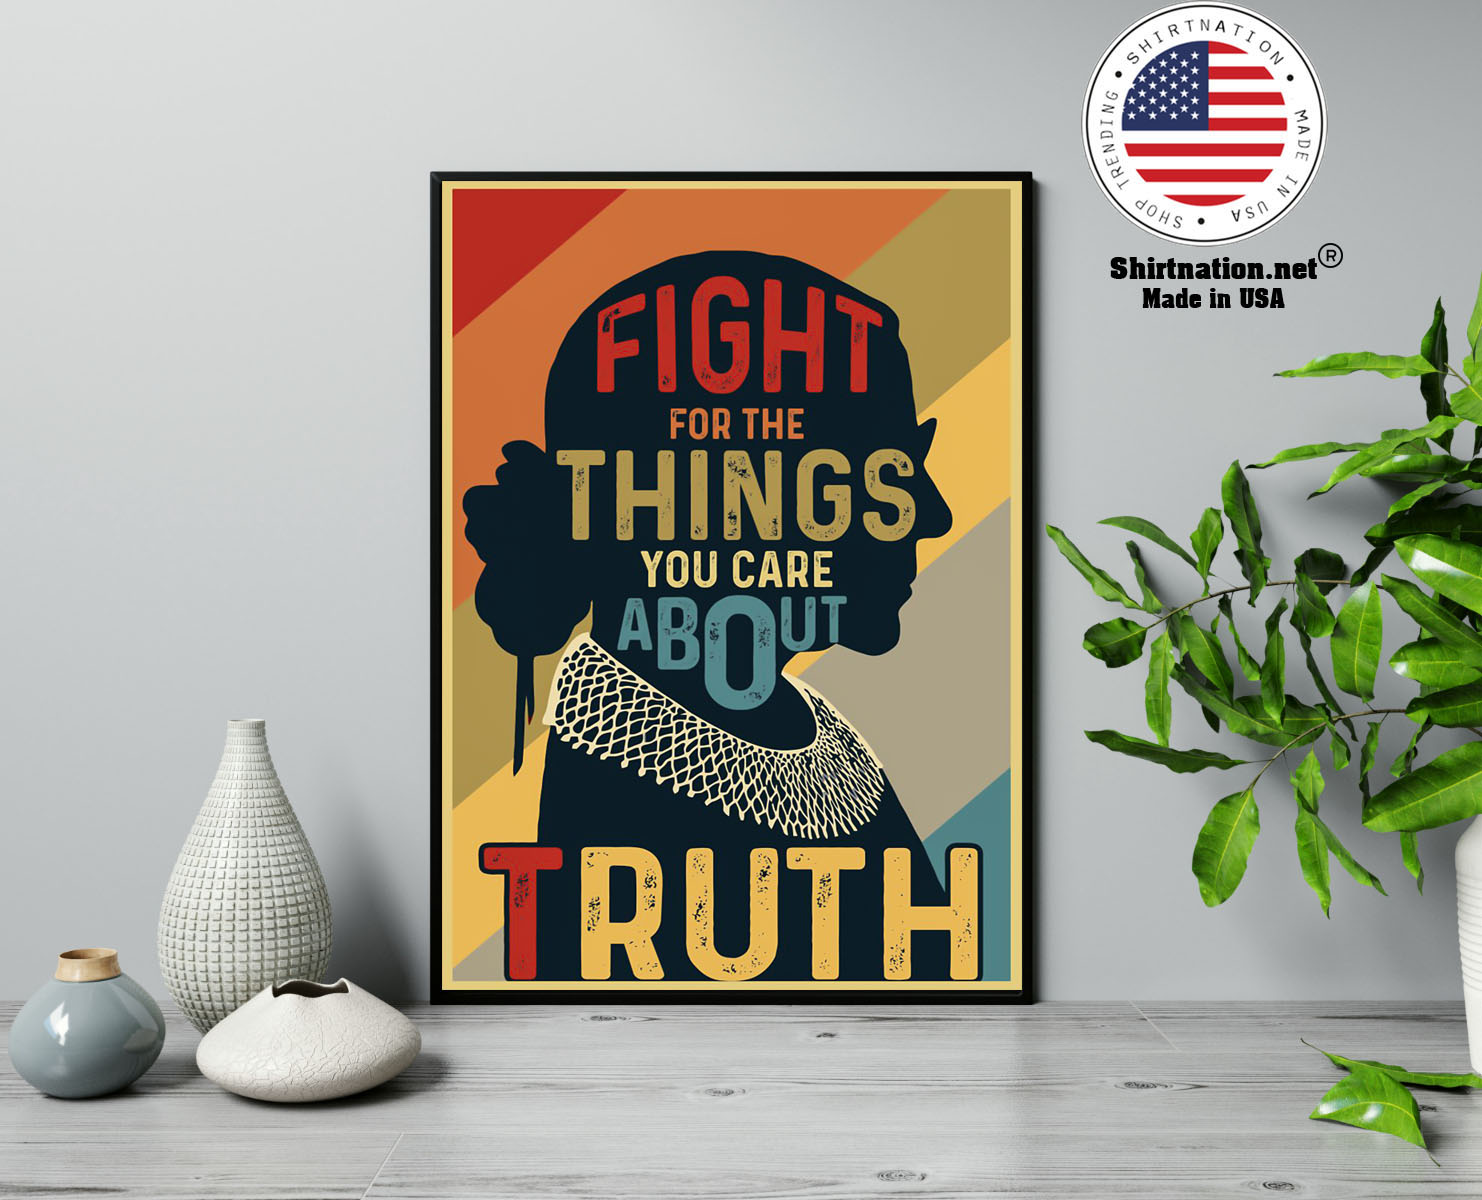 Ruth Fight for the things you care about truth poster 13